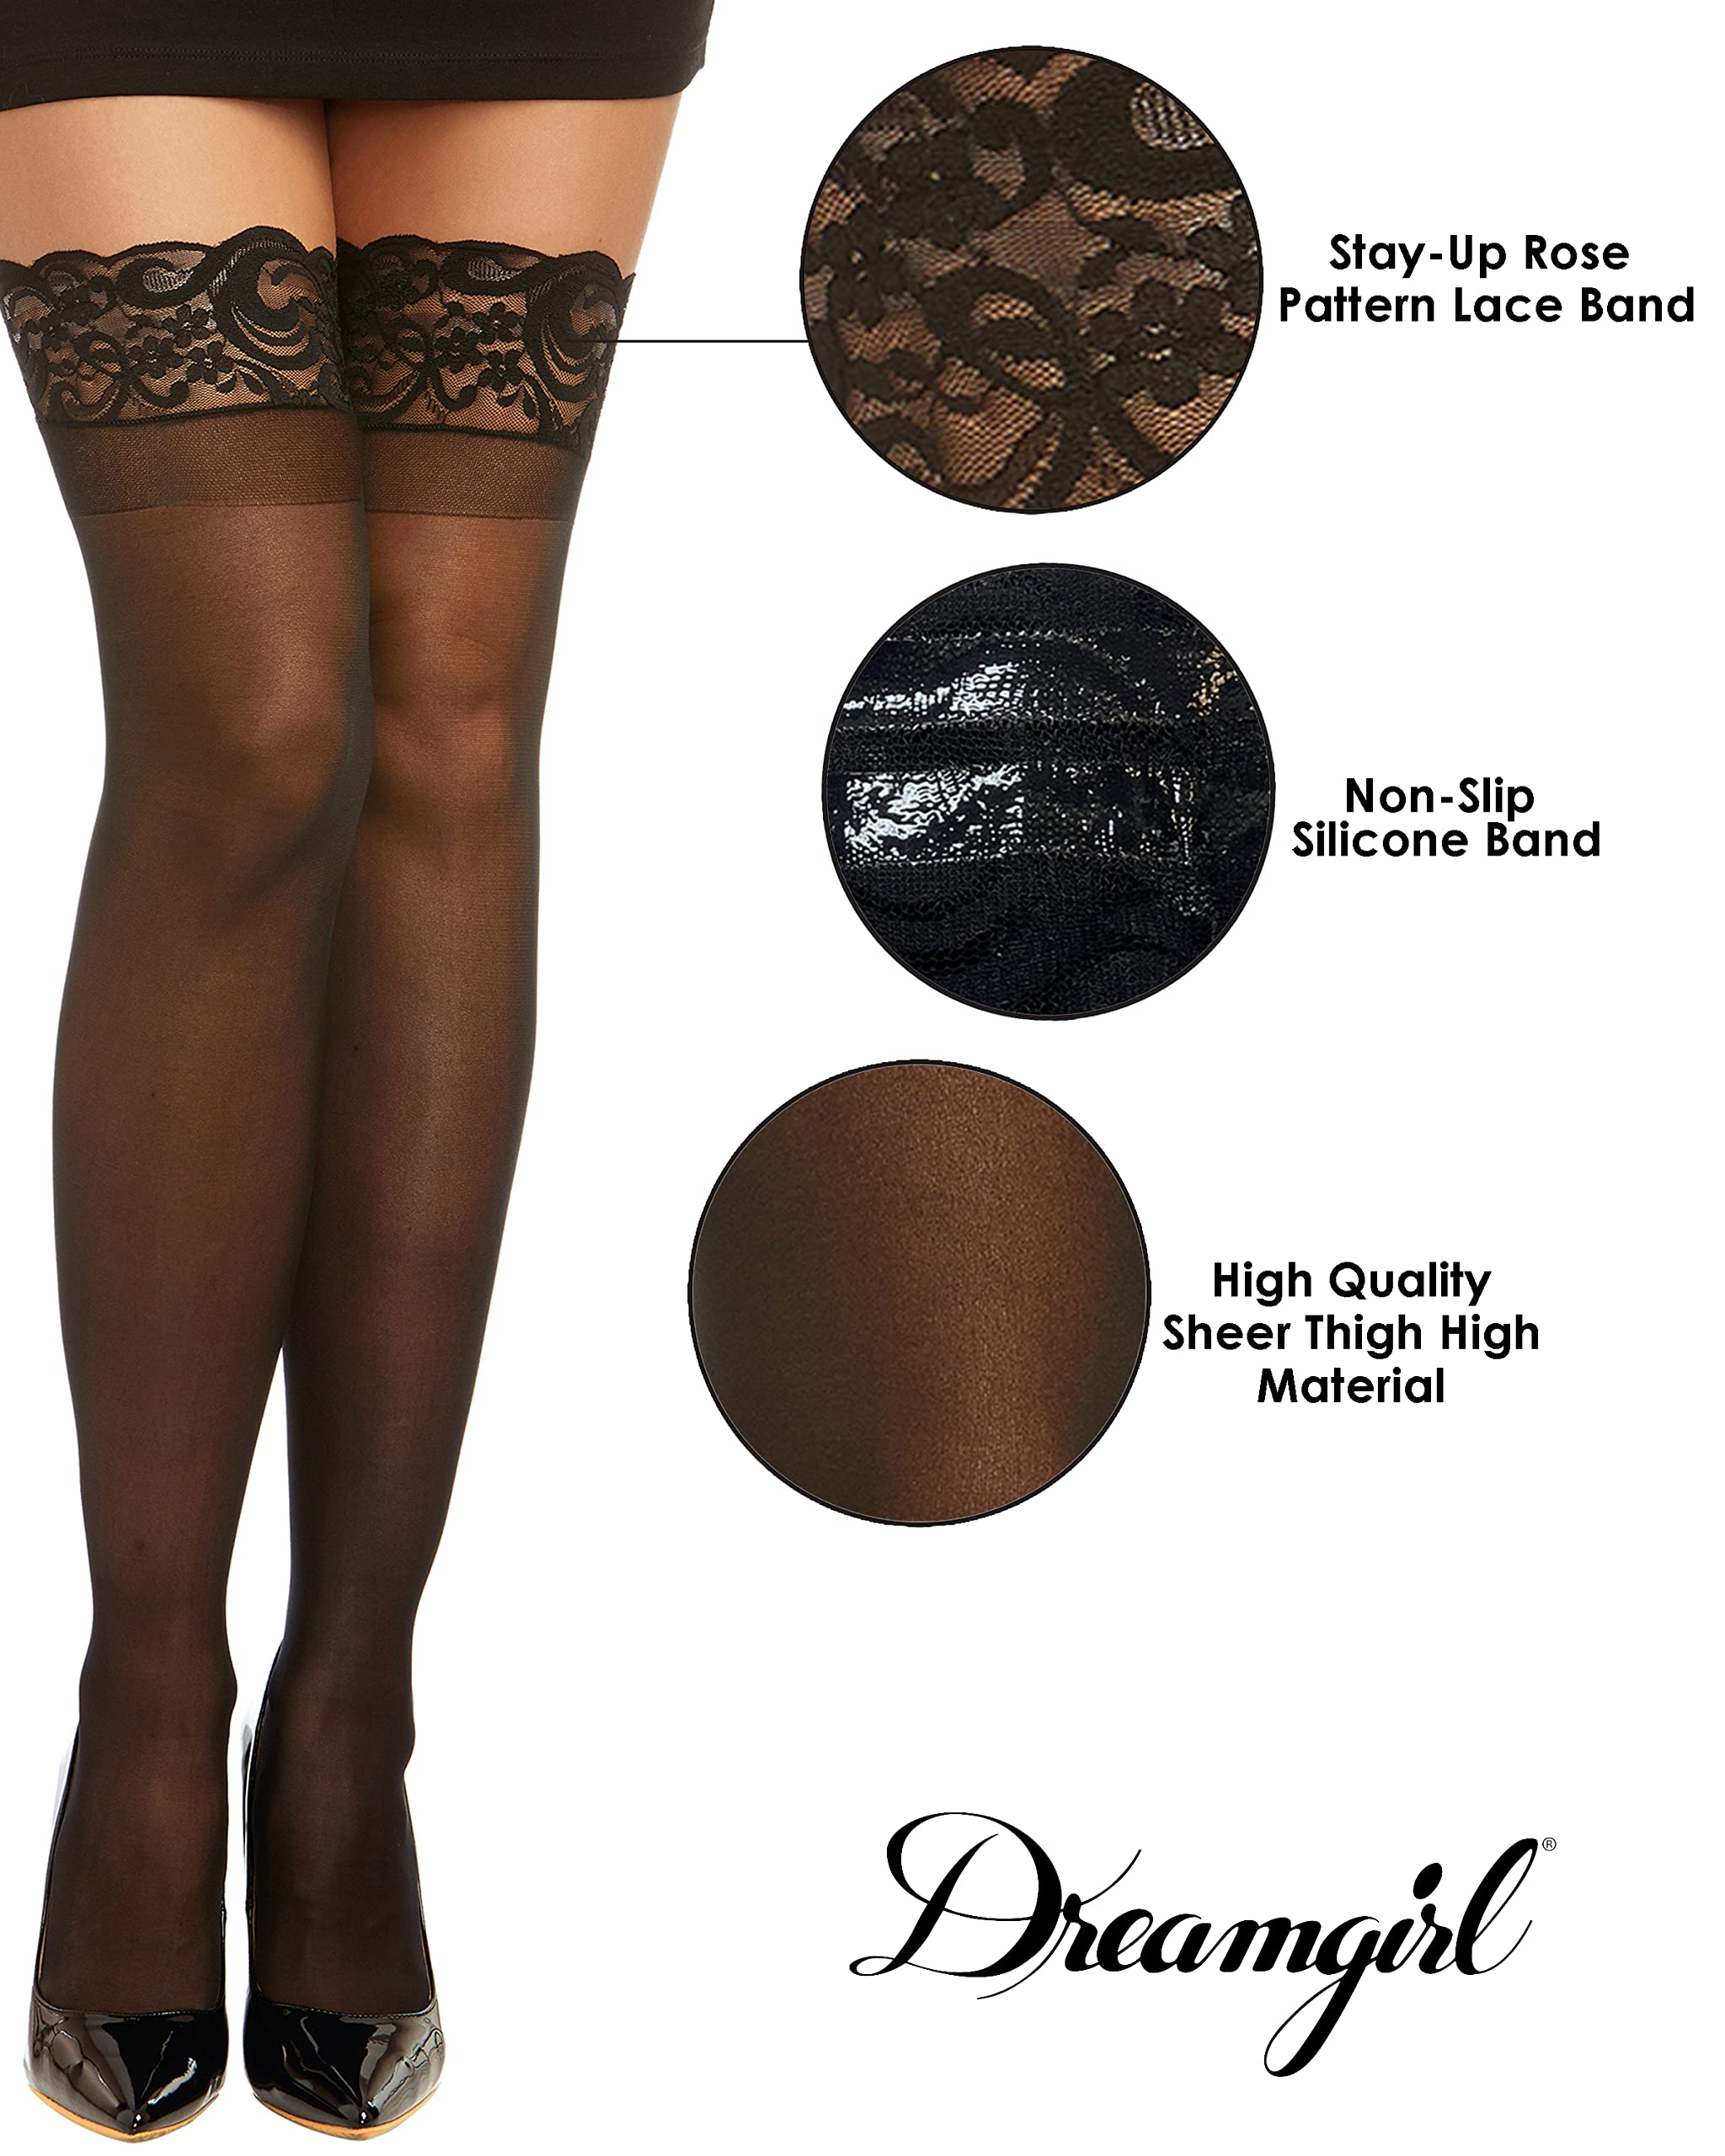 Dreamgirl Women’s Sheer Thigh High Pantyhose Hosiery Nylons Stockings with Comfort Lace Top Anti-Slip Silicone Elastic Band